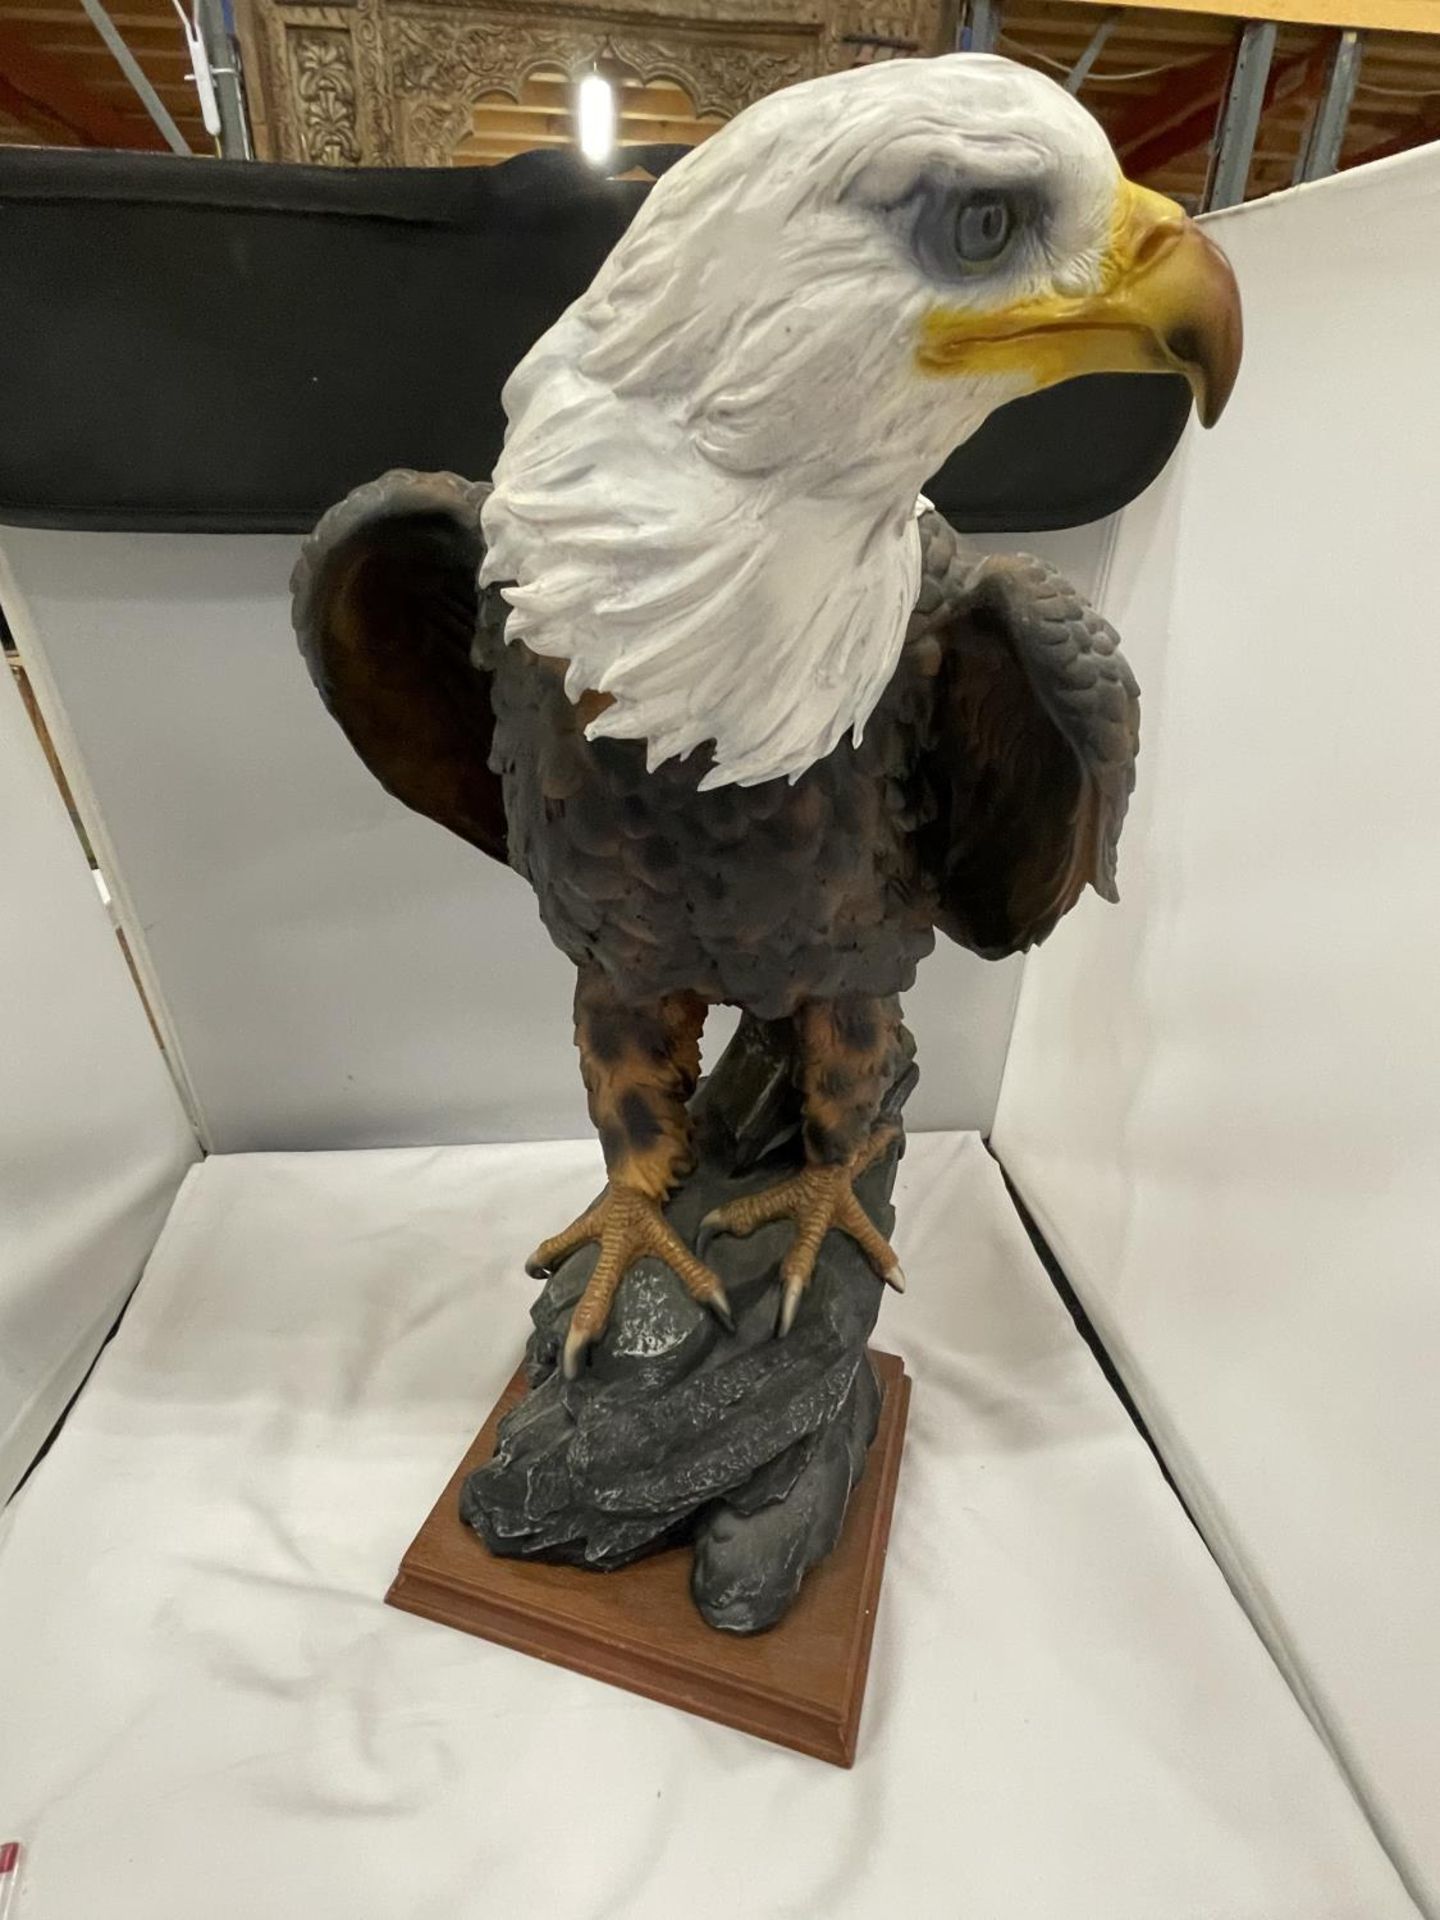 A LARGE RESIN FIGURE OF A BALD EAGLE HEIGHT - Image 2 of 4